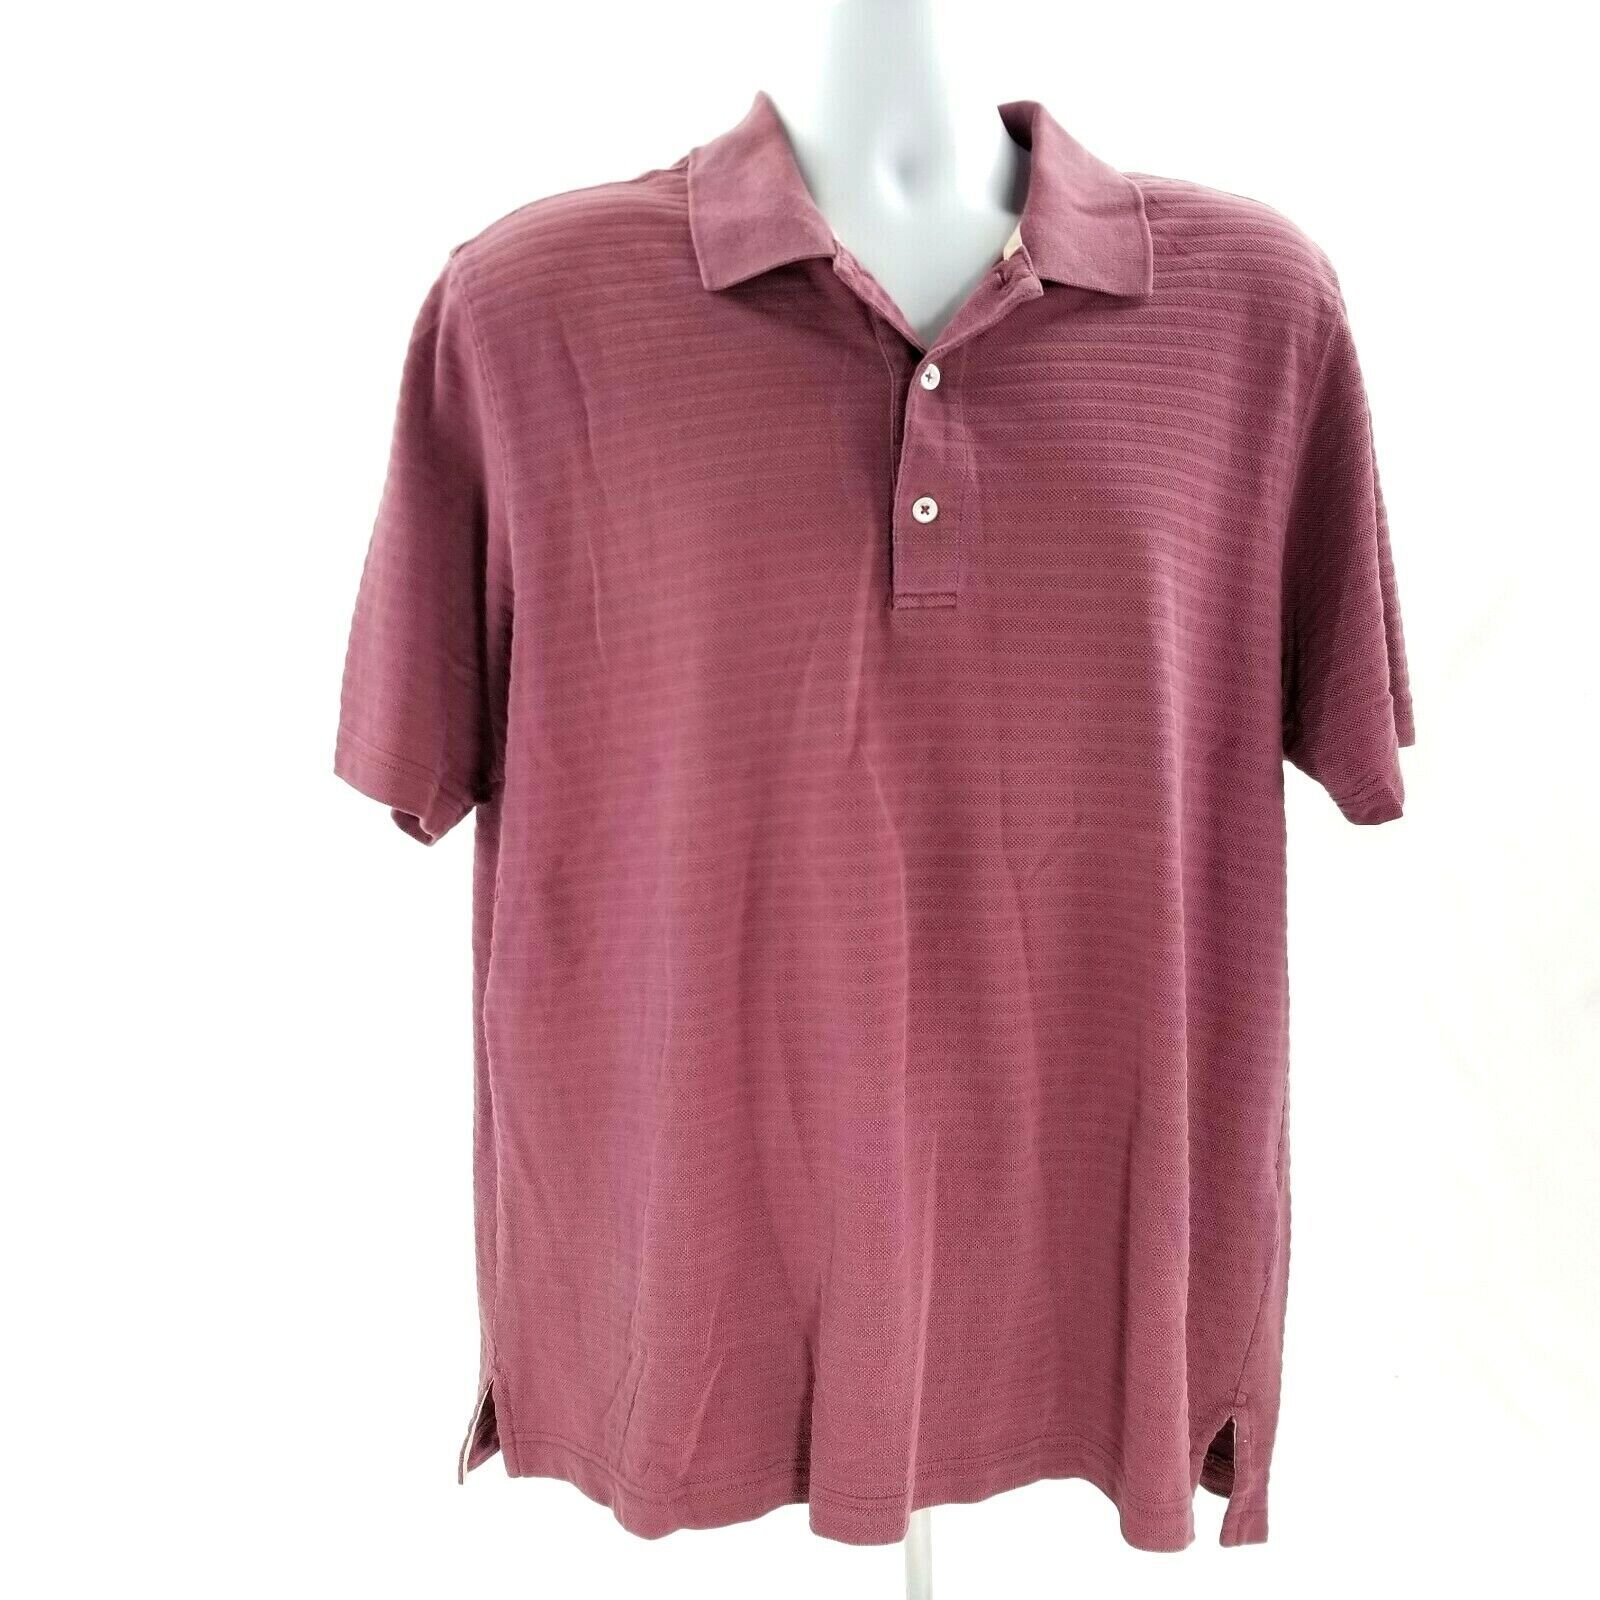 Primary image for Eddie Bauer Short Sleeve Polo Shirt Mens L Golf Maroon Red Striped Cotton Blend